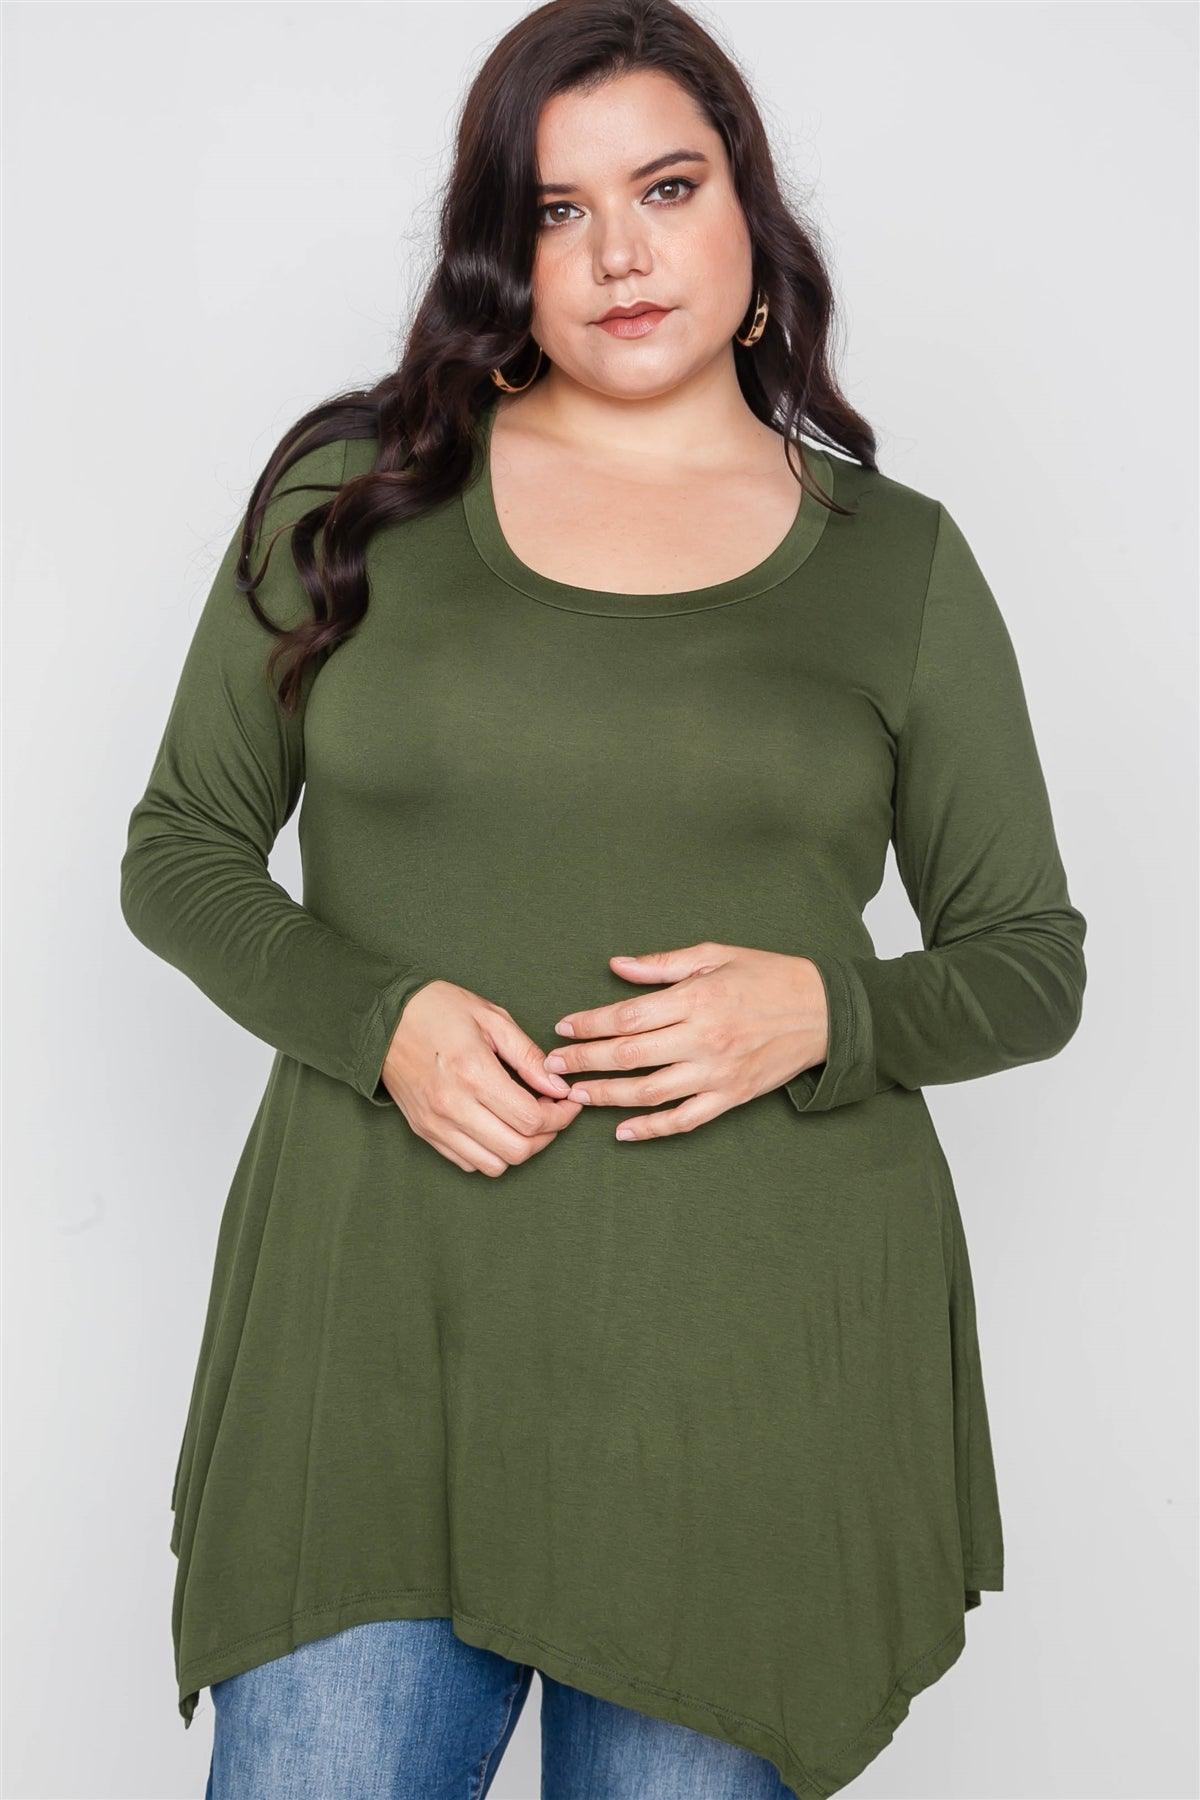 Plus Size Olive Green Long Sleeve Basic Top